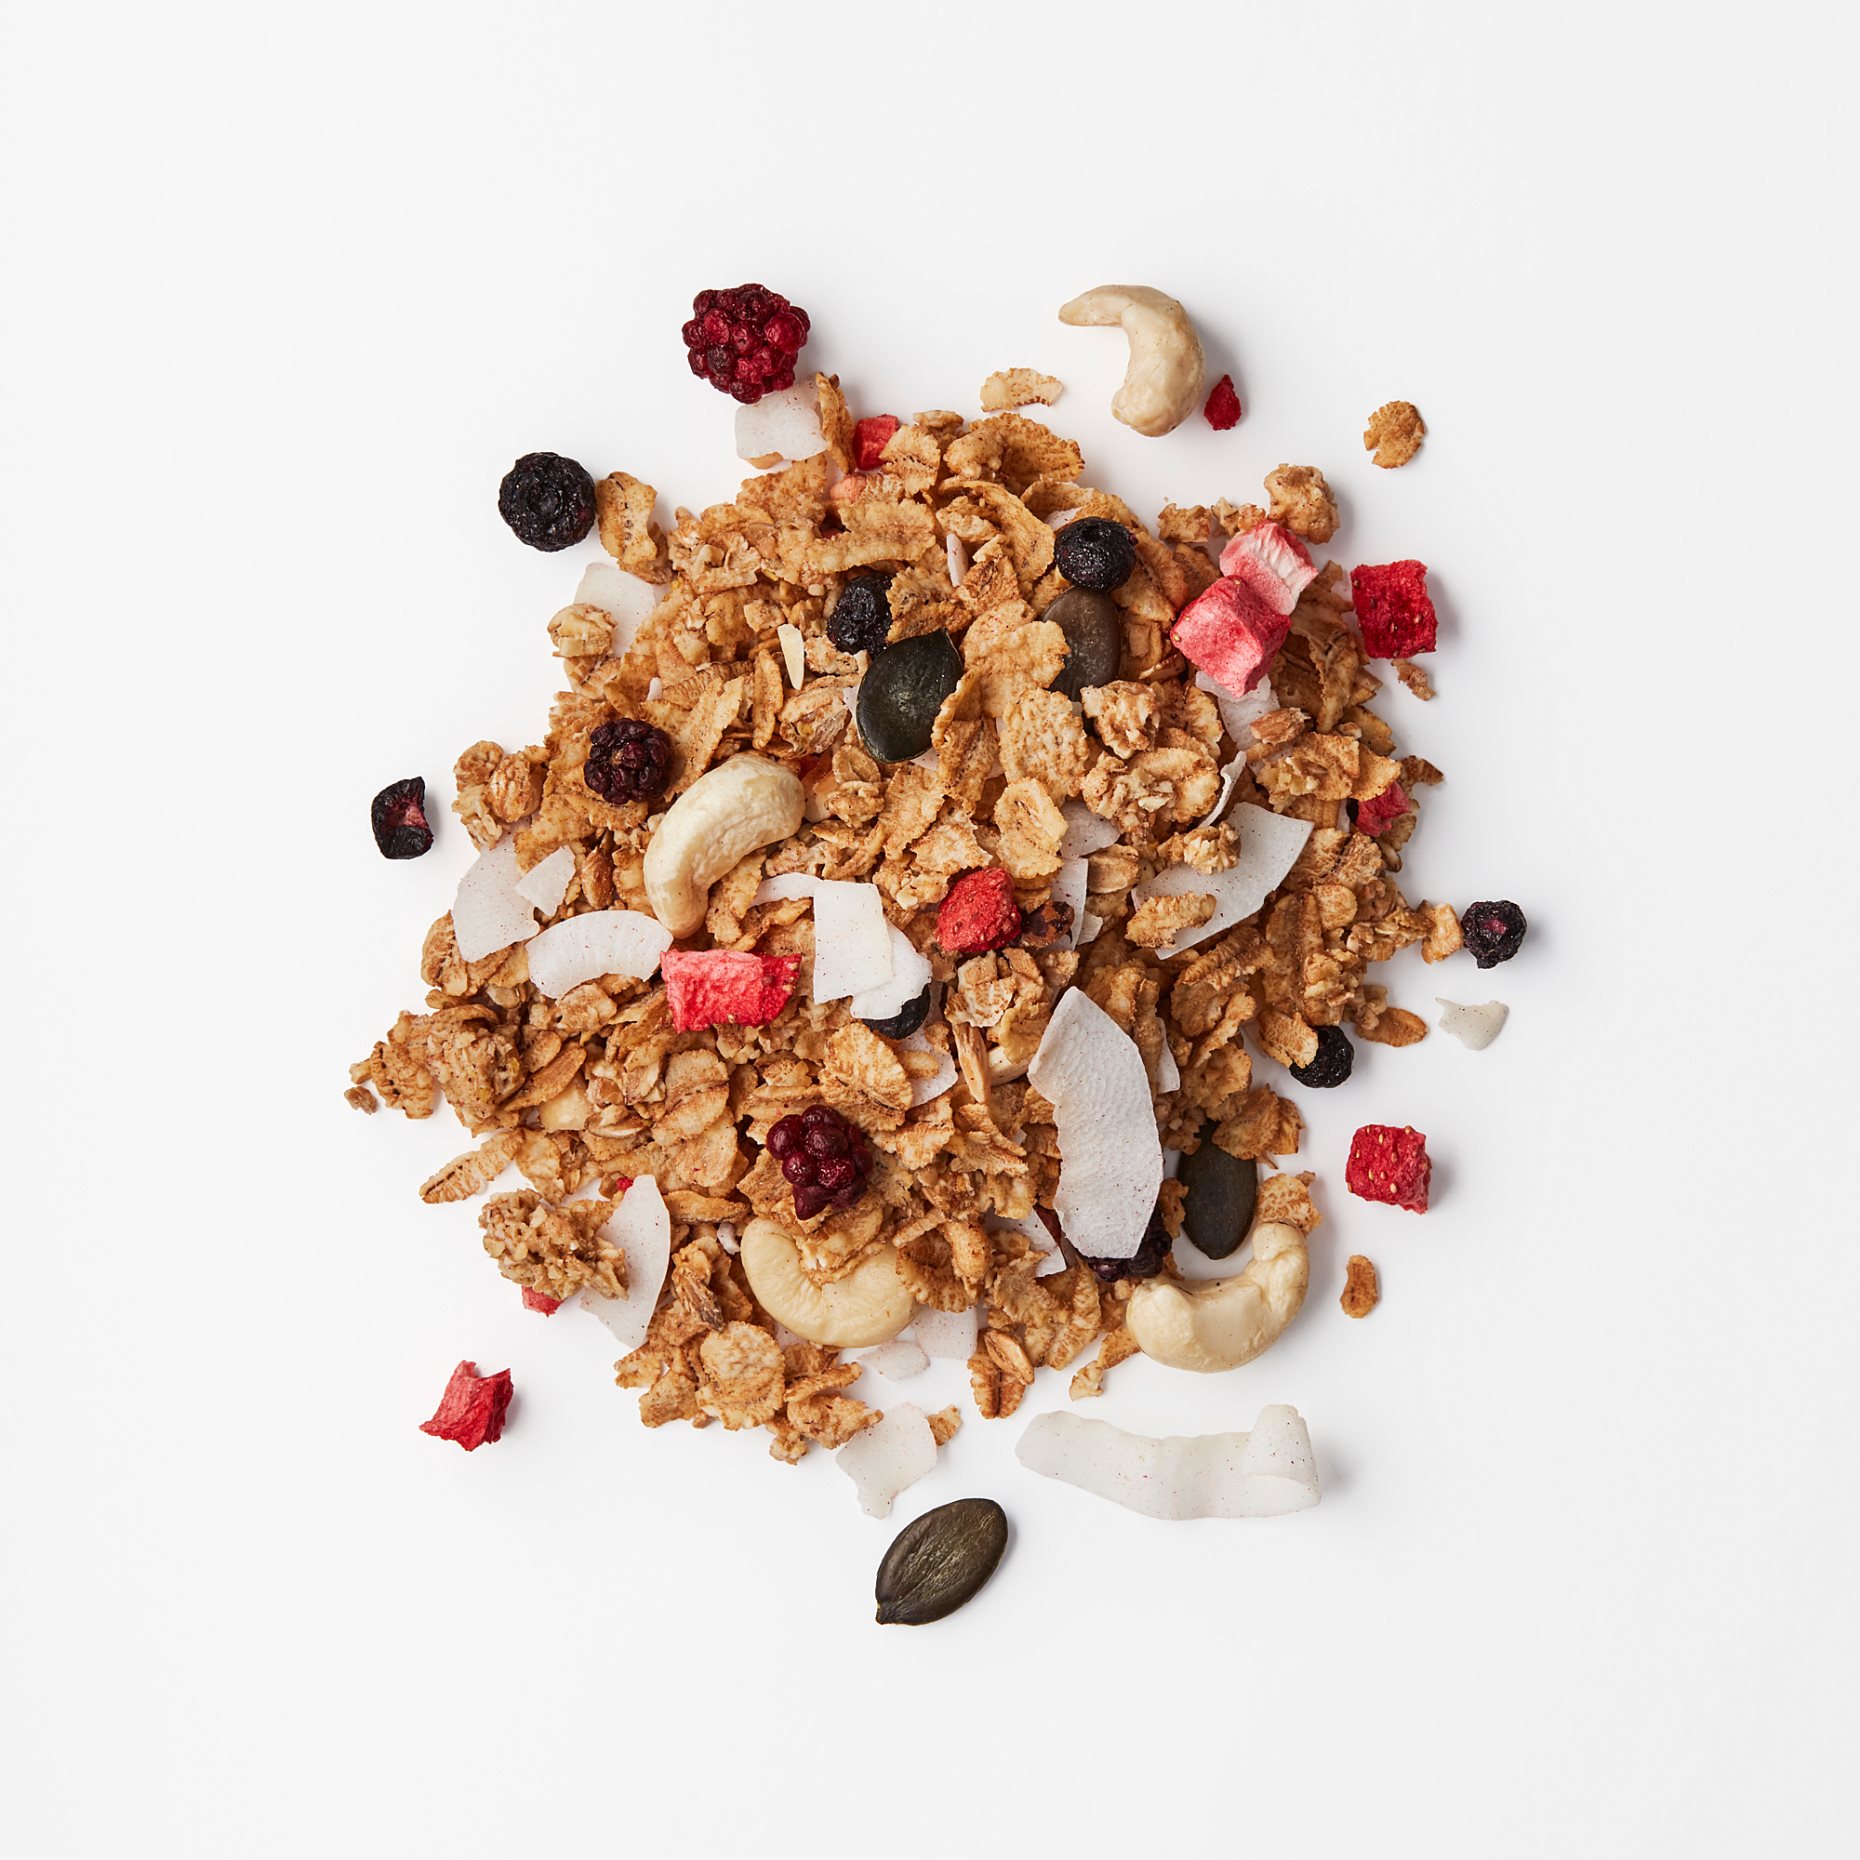 HJALTEROLL, granola with nuts and dried berries, 400 g, 504.783.82